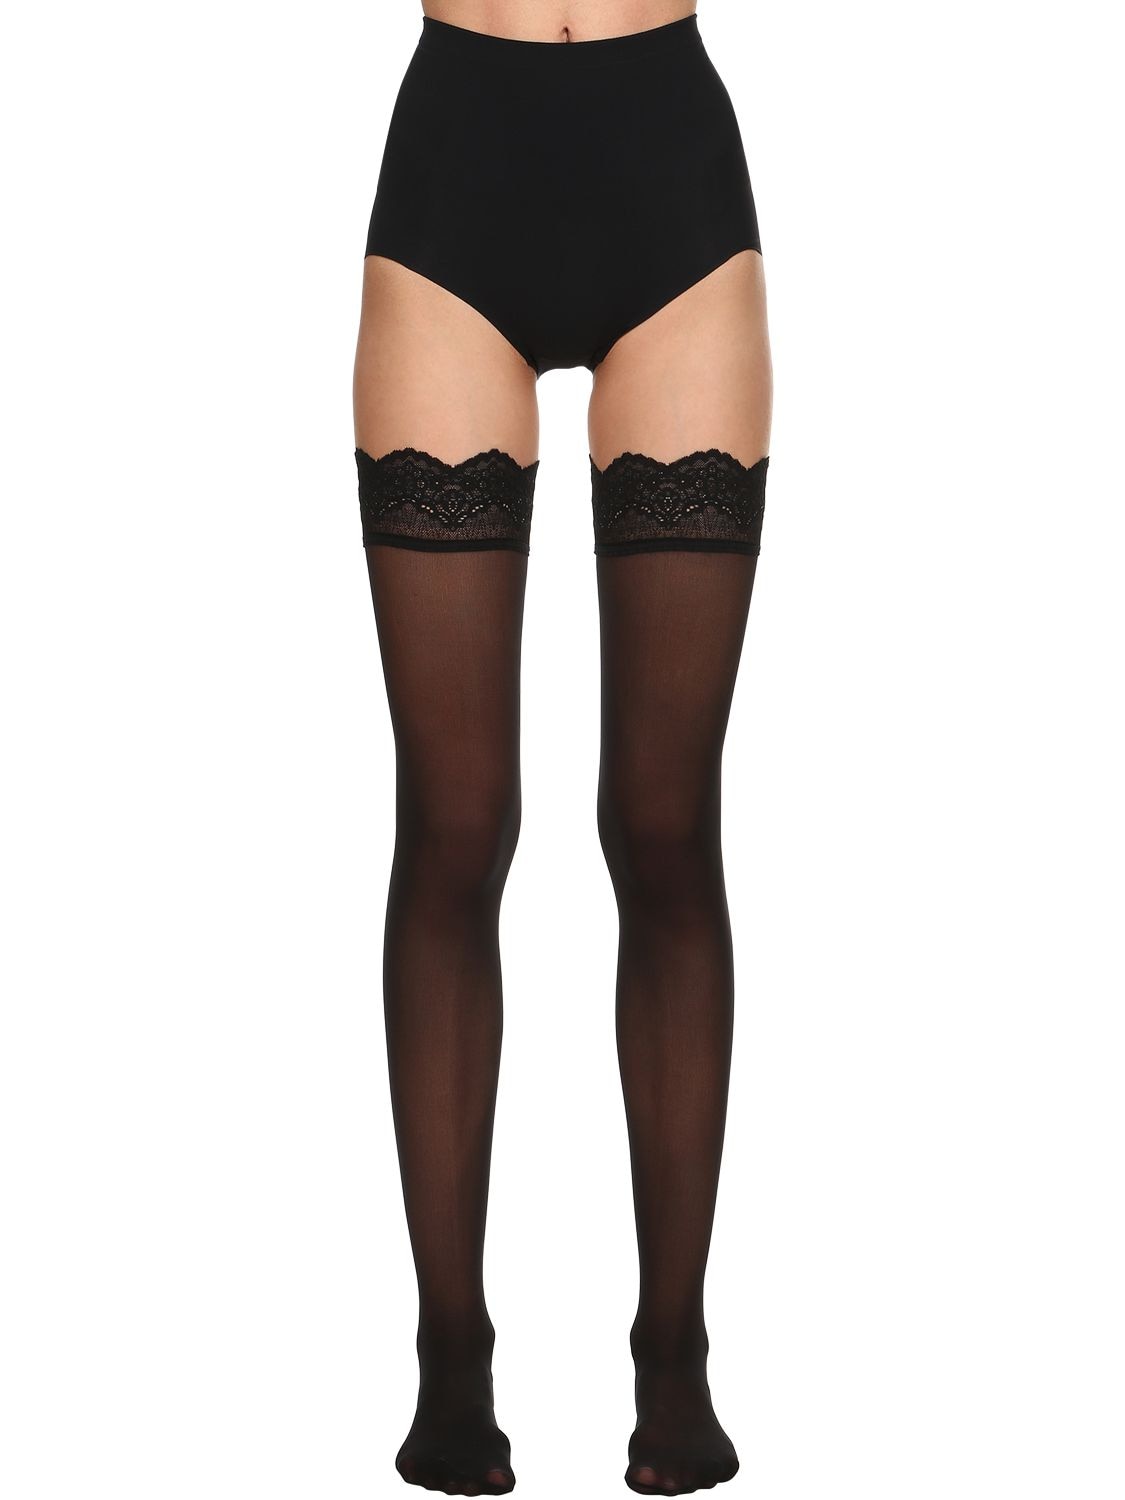 WOLFORD VELVET LIGHT 40 STAY-UP THIGH HIGHS,68IVOP018-NZAWNQ2